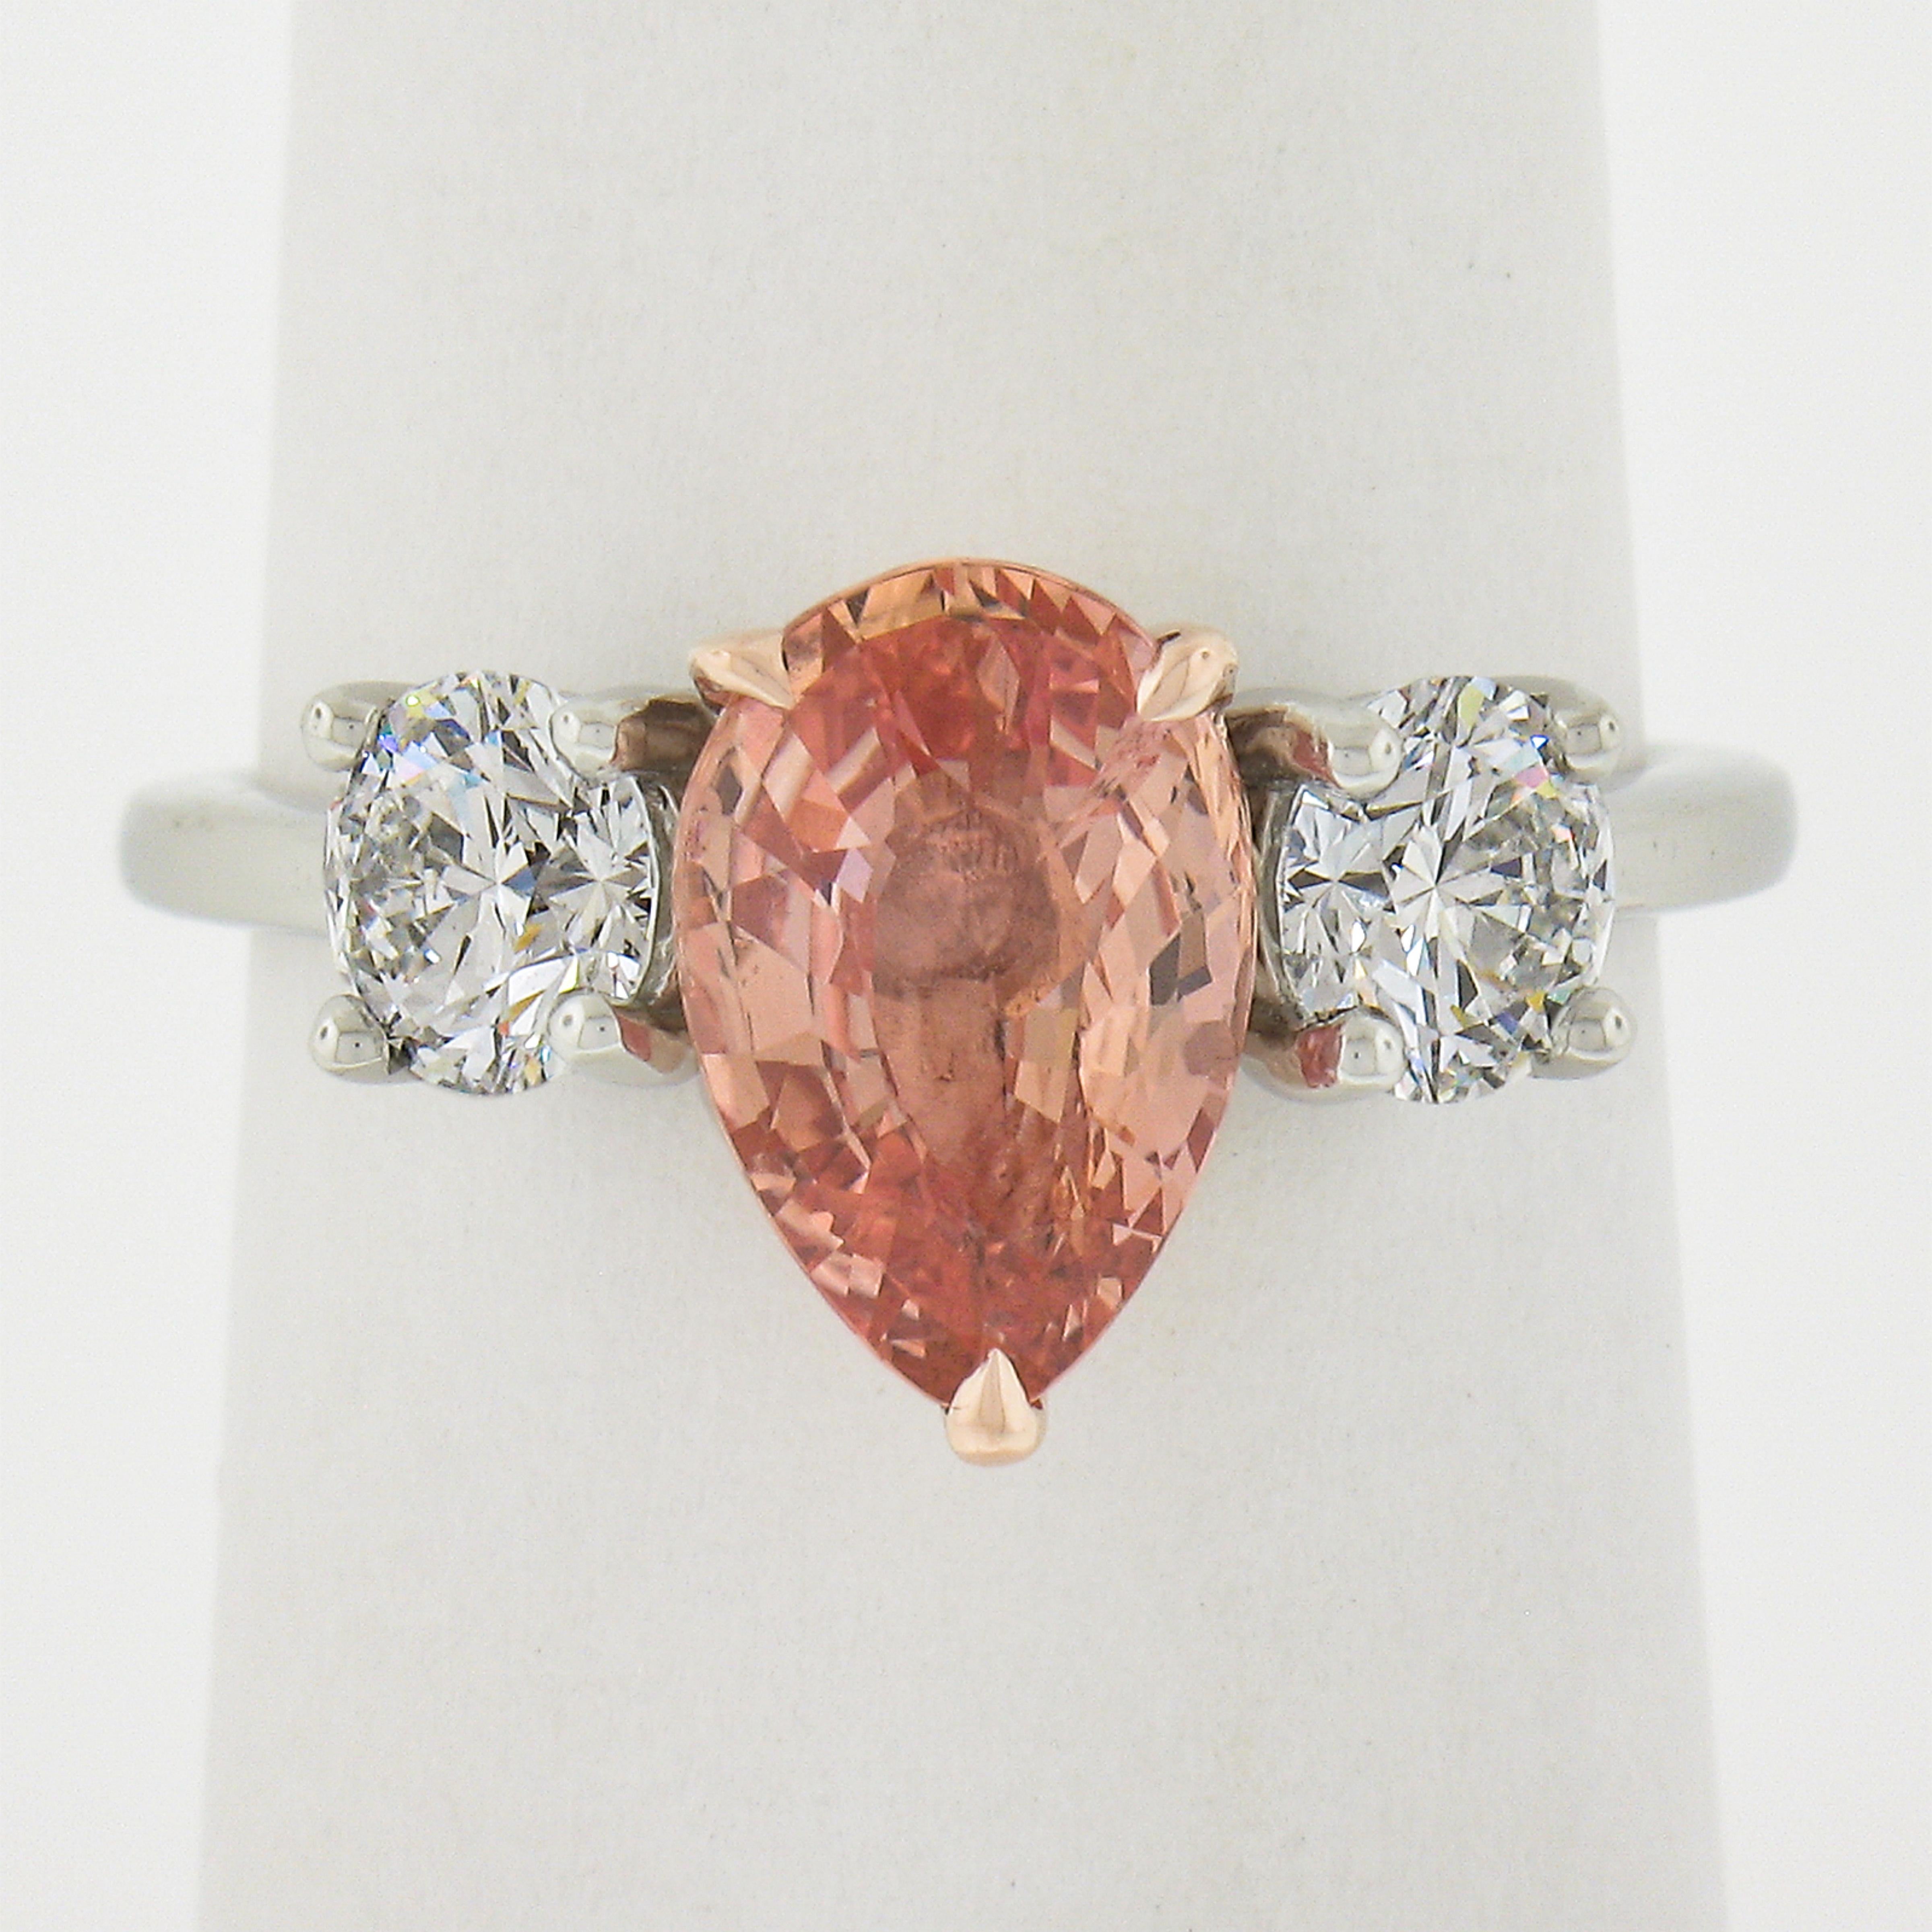 This very elegant and chic padparadscha sapphire and diamond three stone engagement ring is custom designed and crafted in solid platinum. It features a fiery, GIA certified pinkish orange Ceylon sapphire stone that is neatly set in the 14k rose